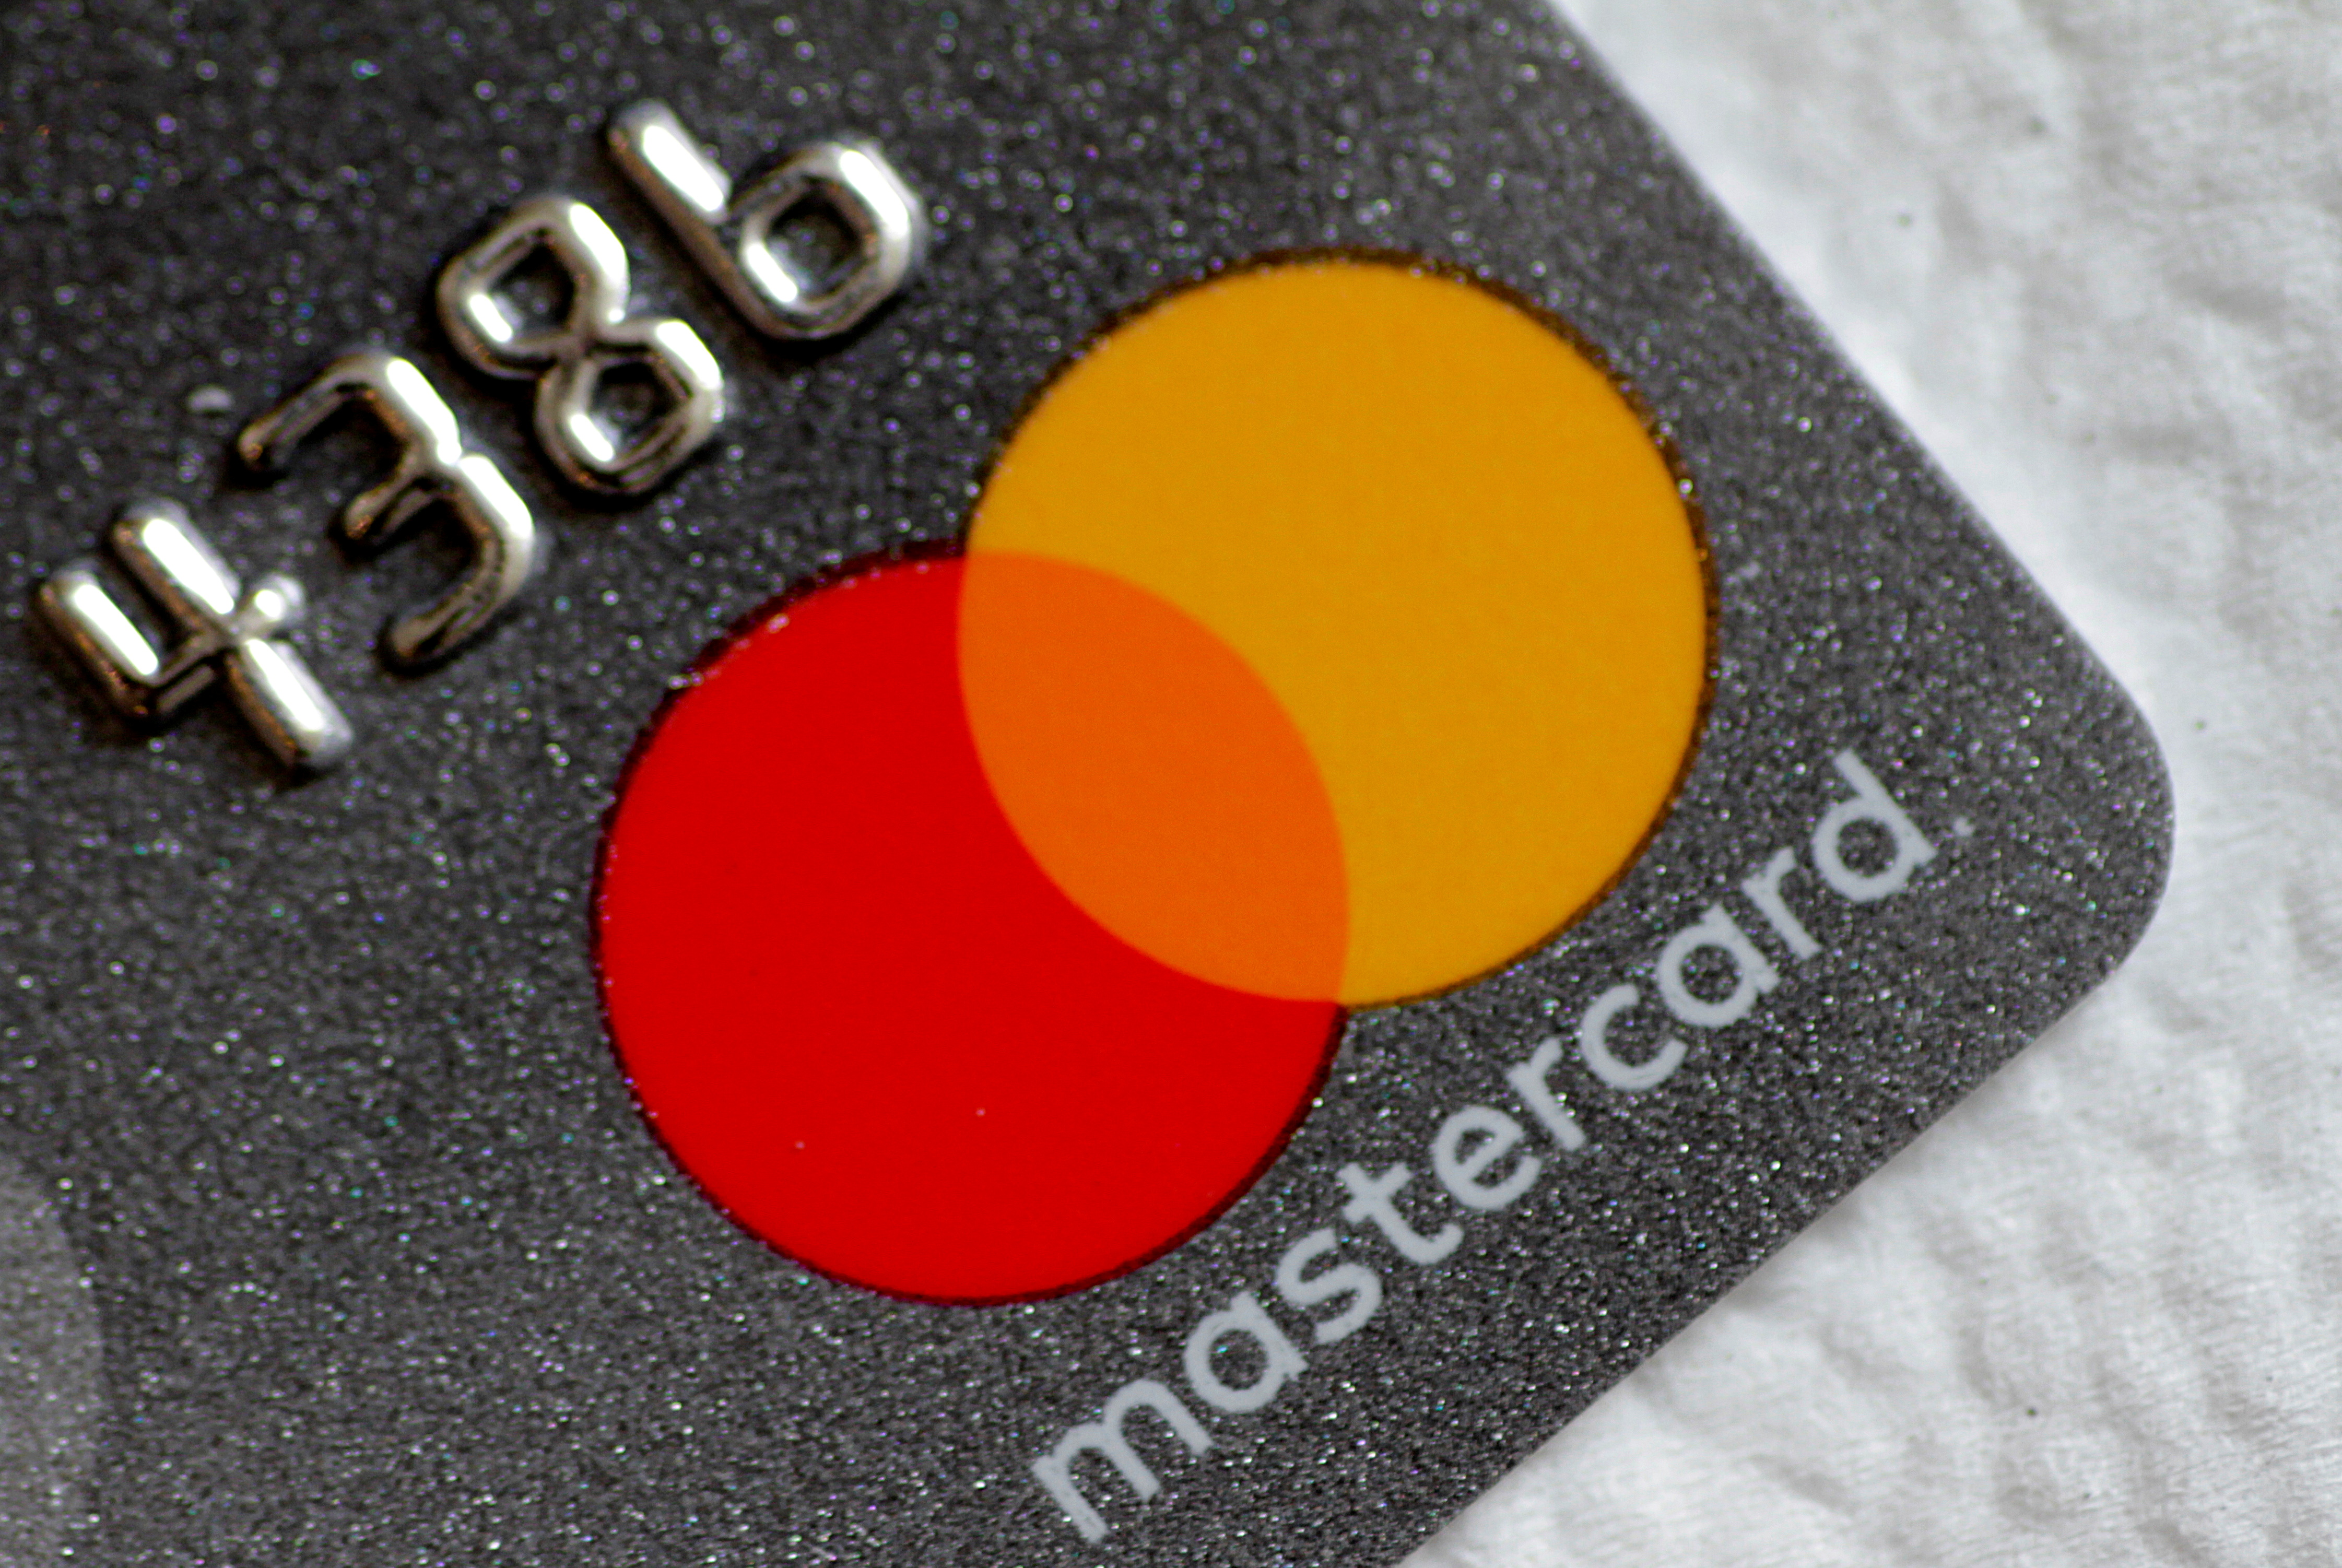 Illustration photo of a Mastercard logo on a credit card